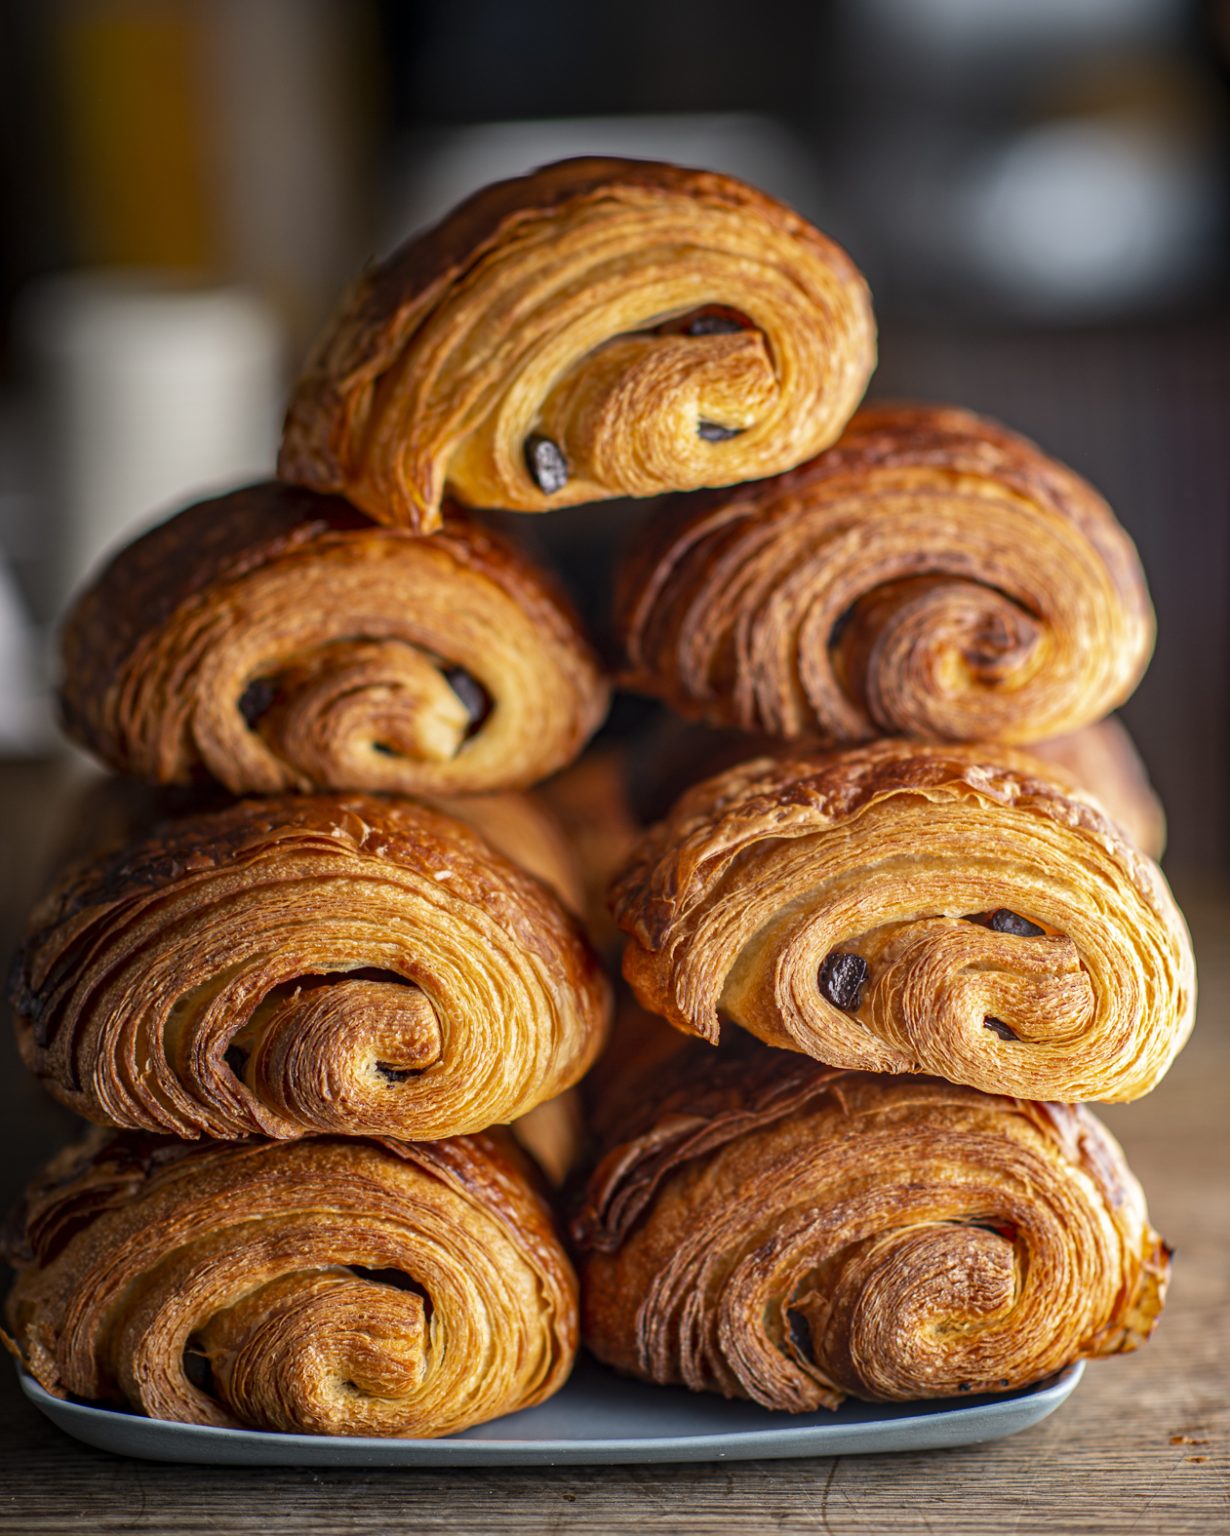 Delicious Pain au Chocolat pastry on a plate, freshly baked and filled with rich chocolate.